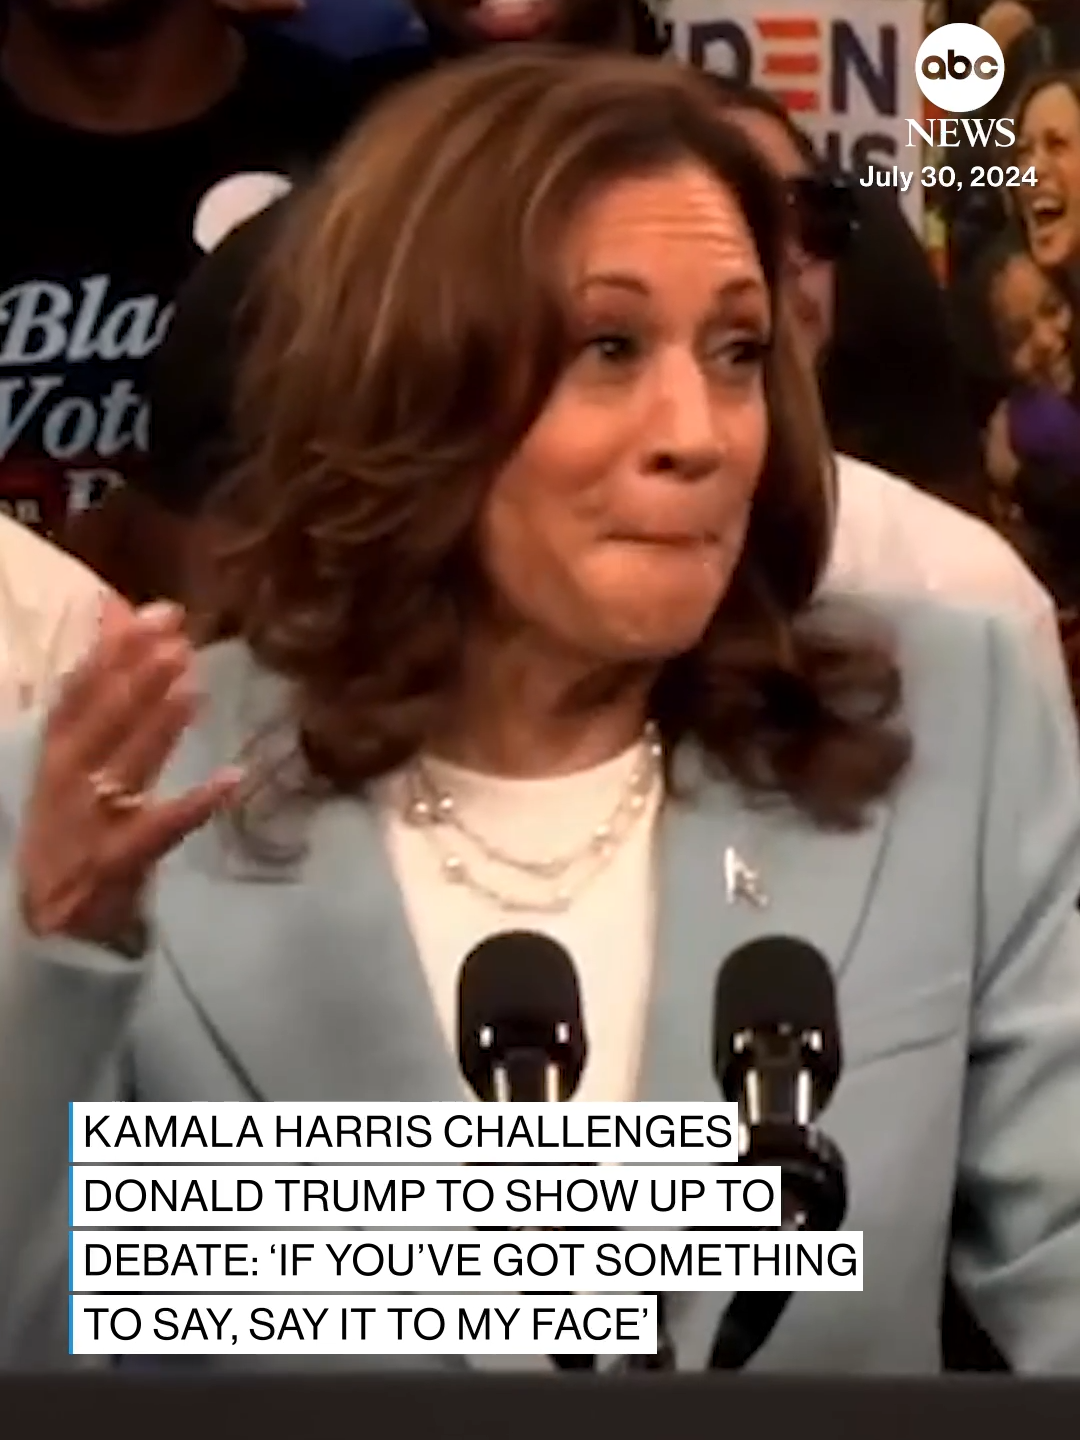 Vice Pres. Kamala Harris told supporters at a Georgia rally she hopes former Pres. Trump will 